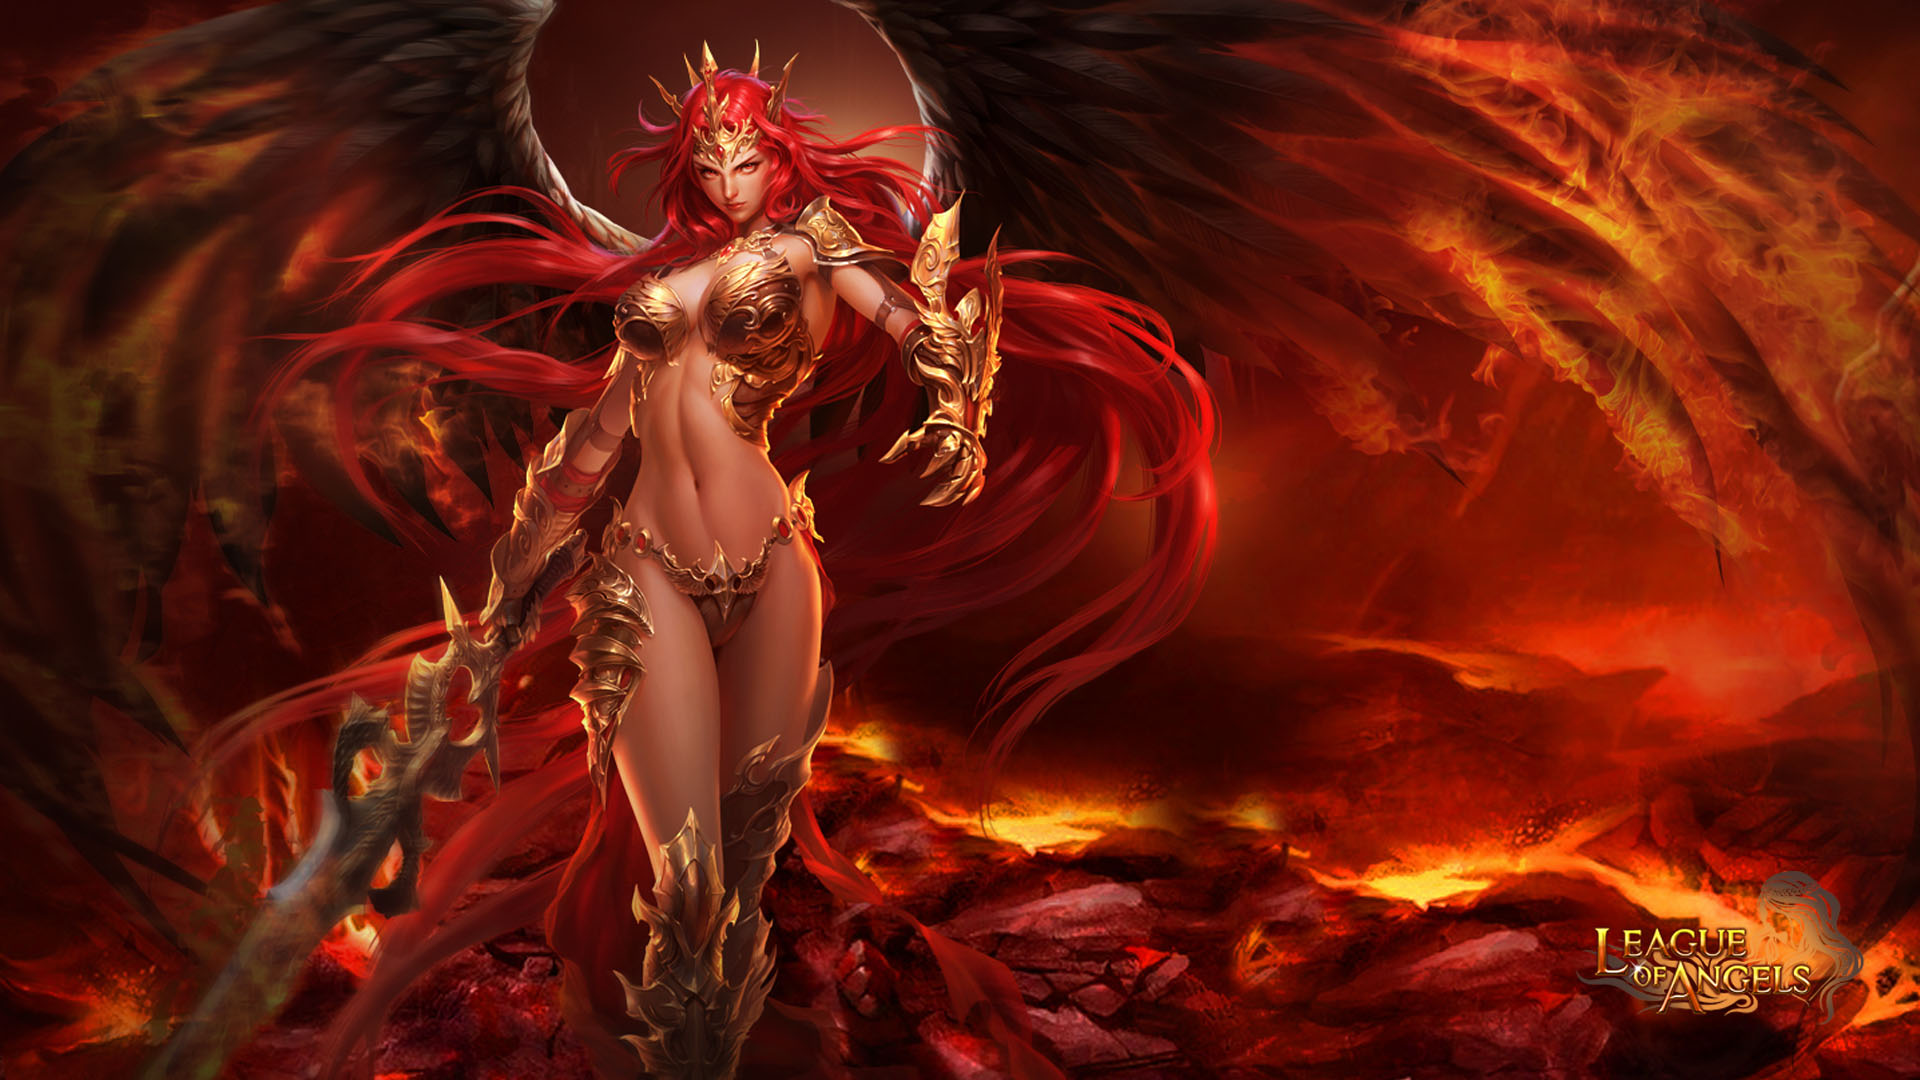 Fantasy Flame Girl League Of Angels Mikaela League Of Angels Sword Woman 1920x1080